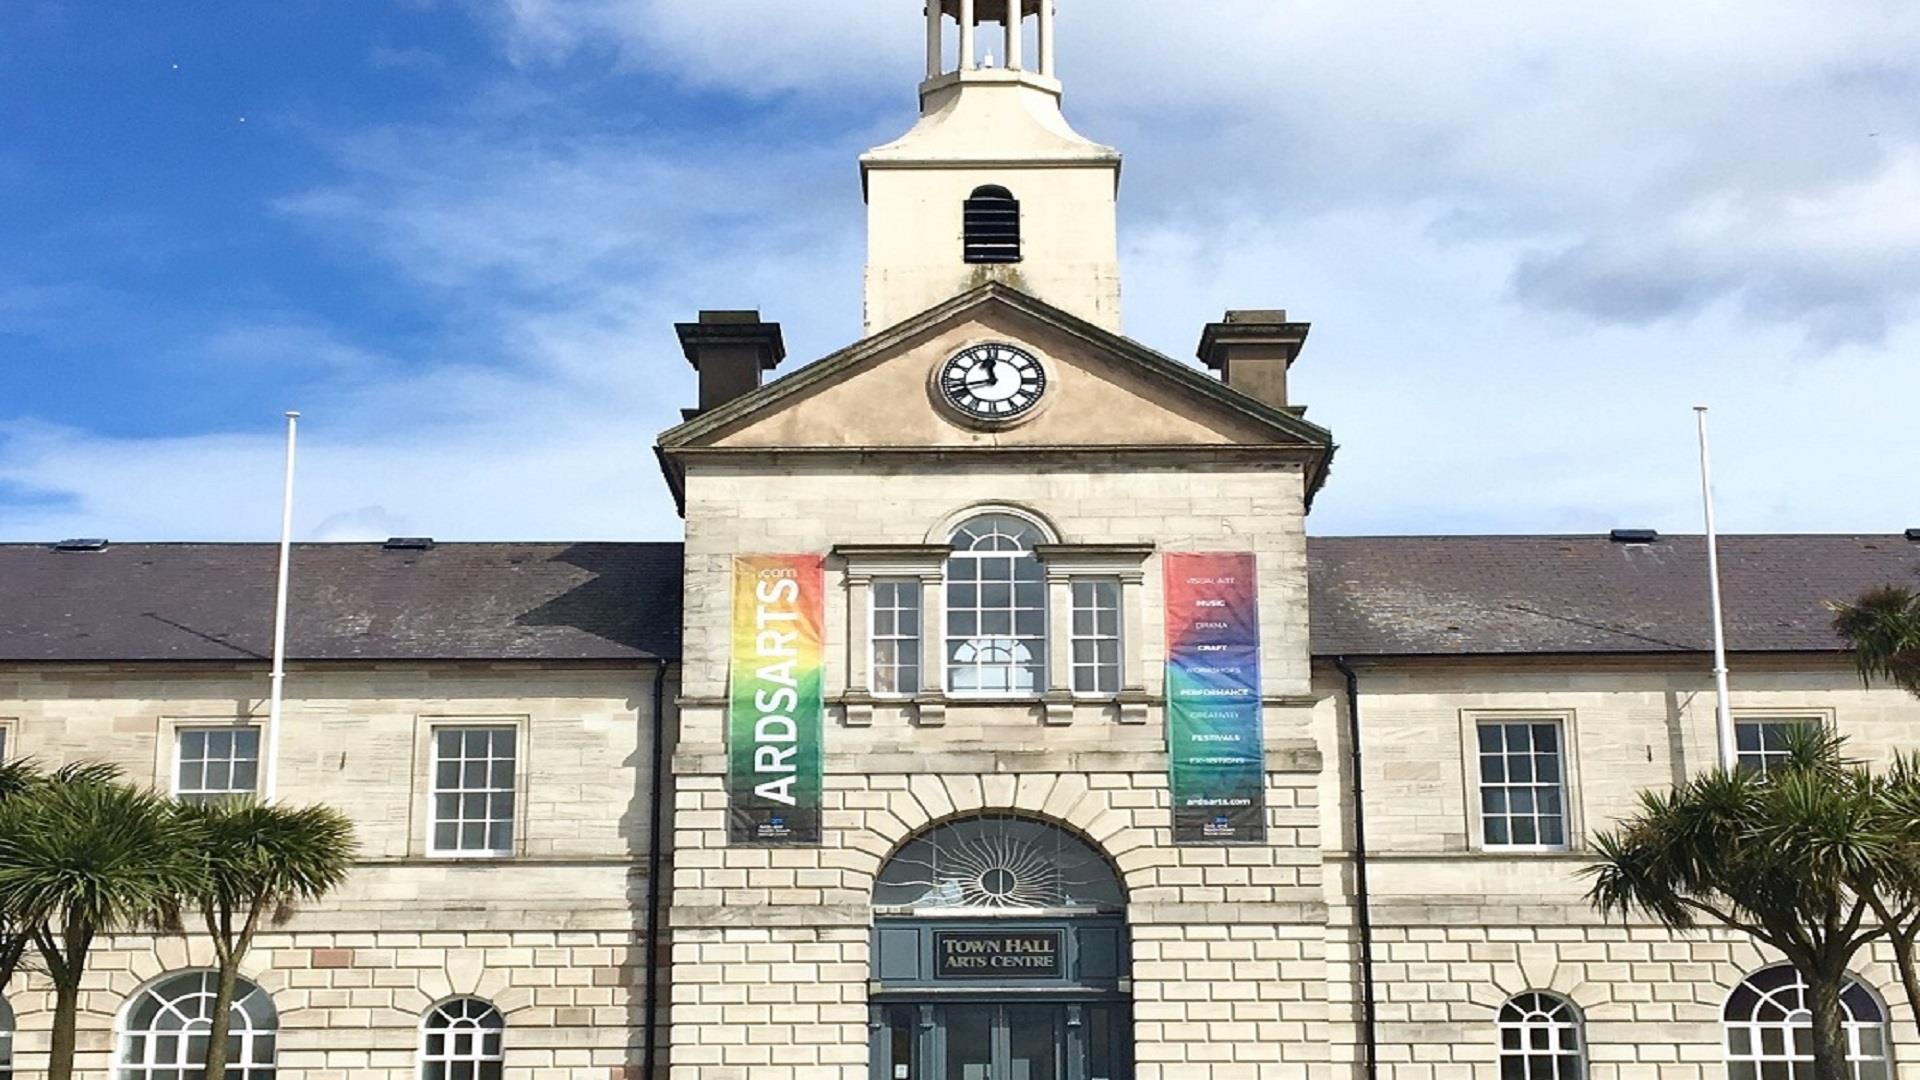 Photograph of the front exterior building of Ards Arts Centre previously the Town Hall, with backdrop of blue sky and two banners flanking the front w